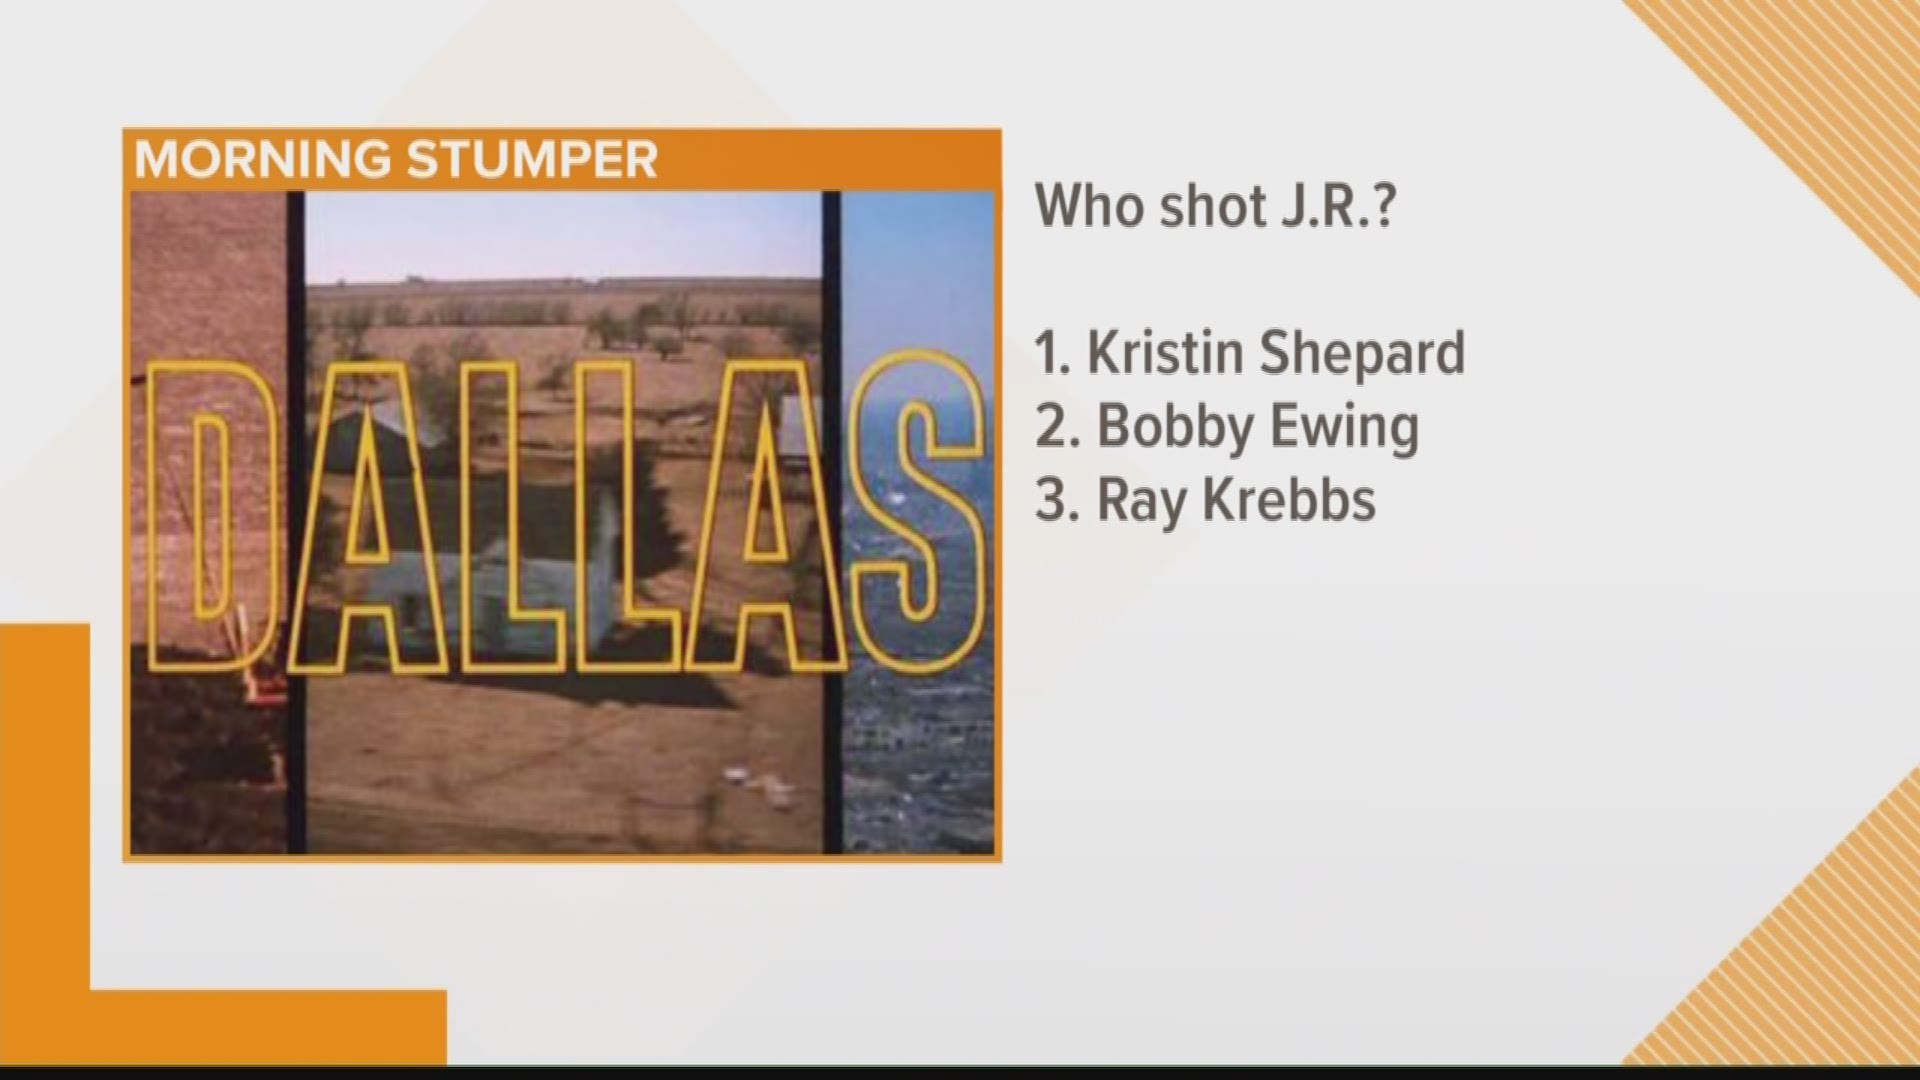 For today's stumper we asked: Who shot J.R.?